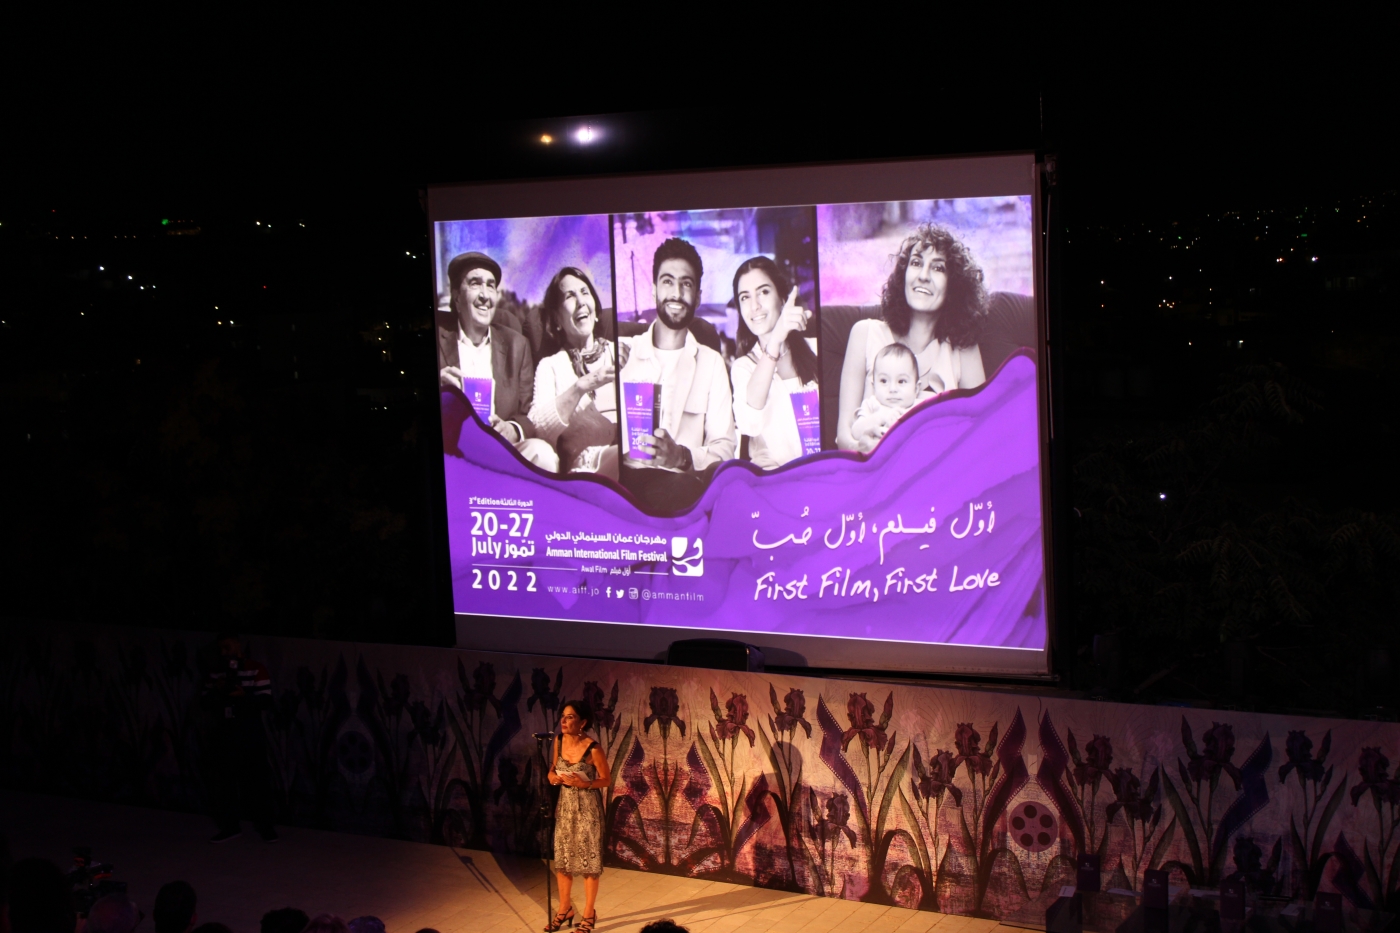 The film festival was a showplace for highlighting new and emerging talent in Jordan (MEE/ Hanna Davis)